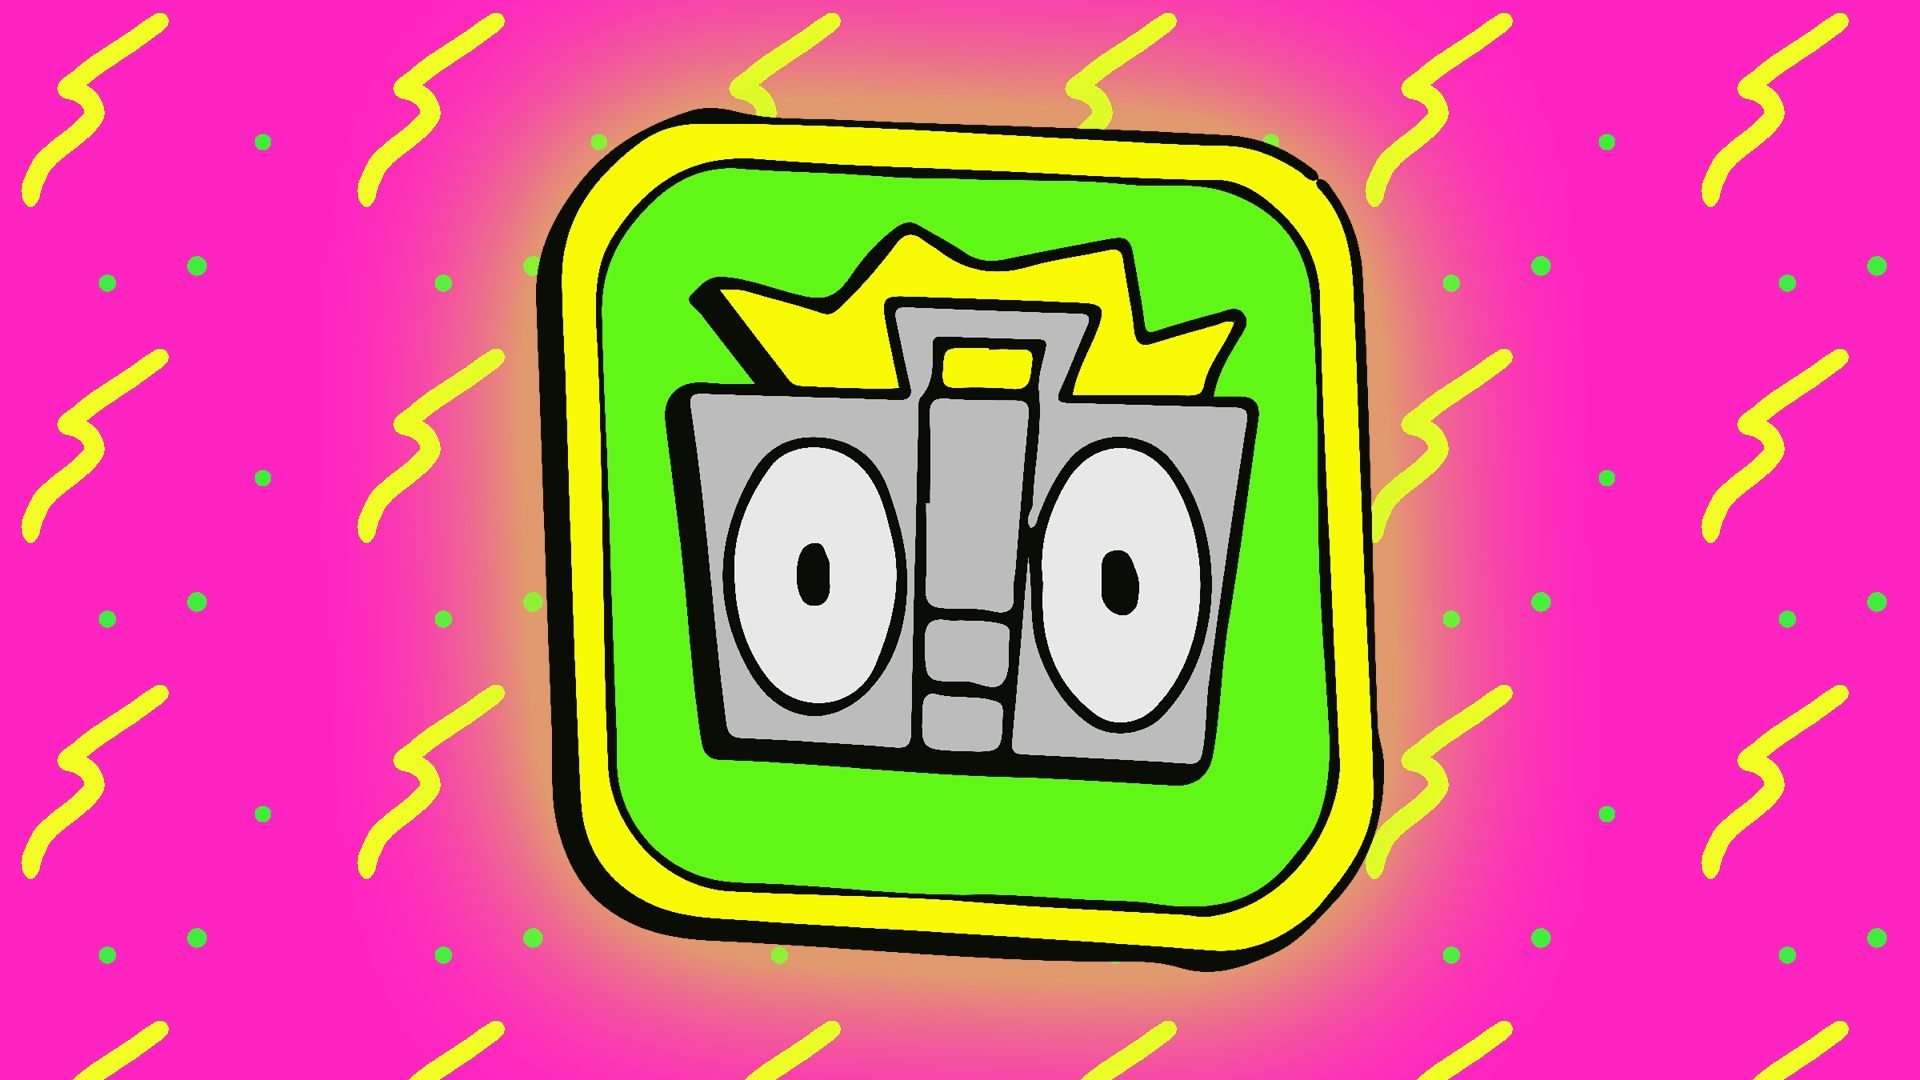 Icon for Boom Box Baby